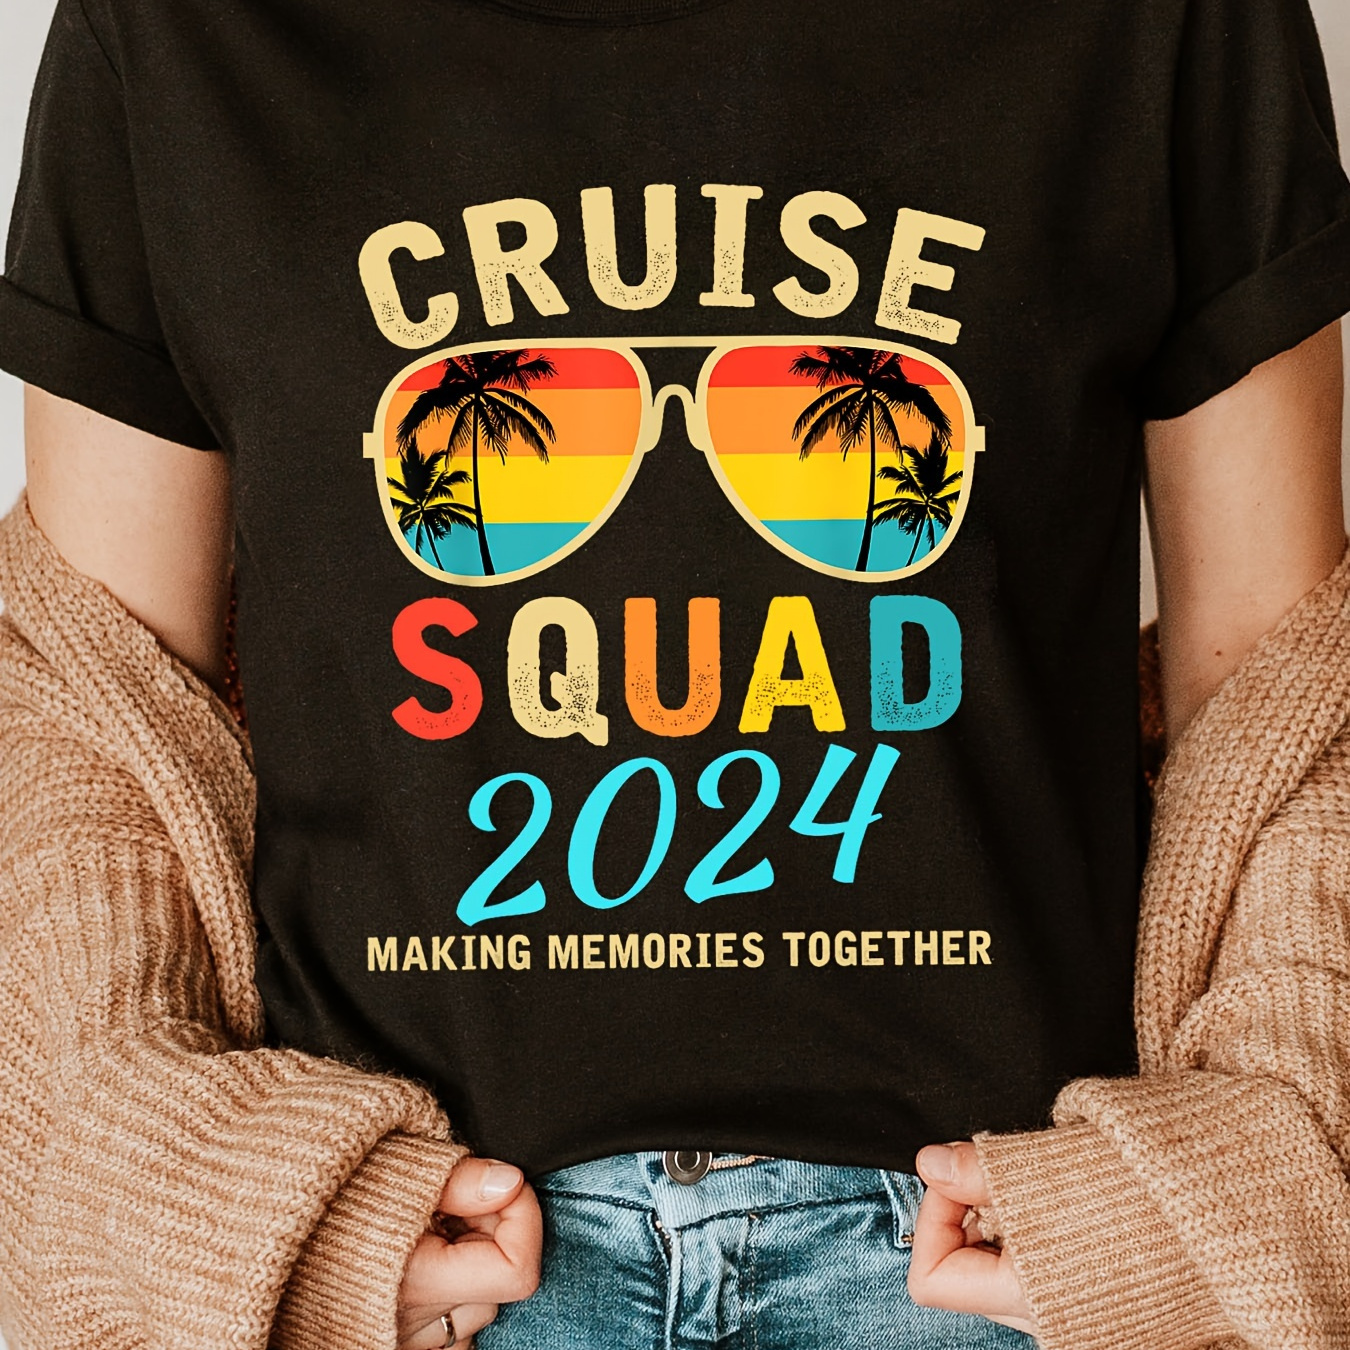 

Cruise Squad Print Crew Neck T-shirt, Short Sleeve Casual Top For Summer & Spring, Women's Clothing